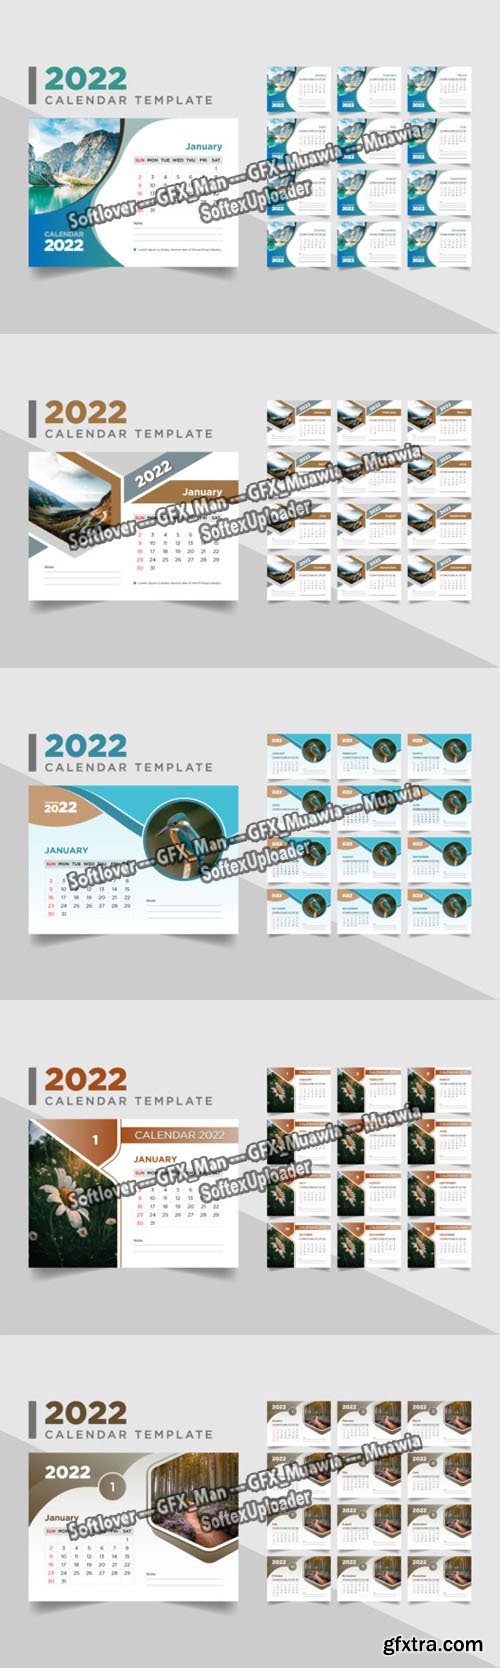 5 Desk Calendars for 2022 Vector Templates Collection [12-Months]